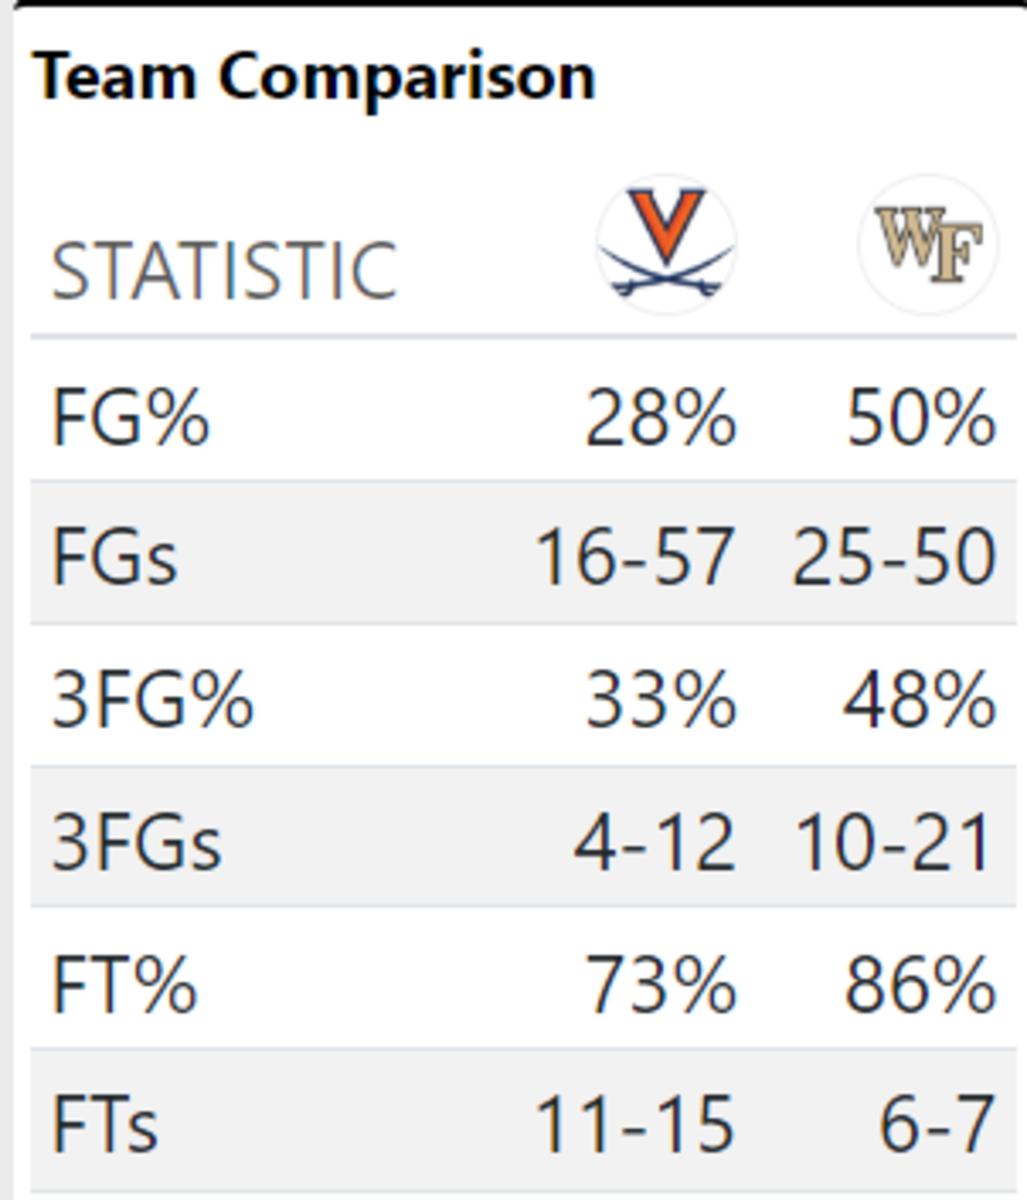 Box score of shooting statistics between Virginia and Wake Forest.